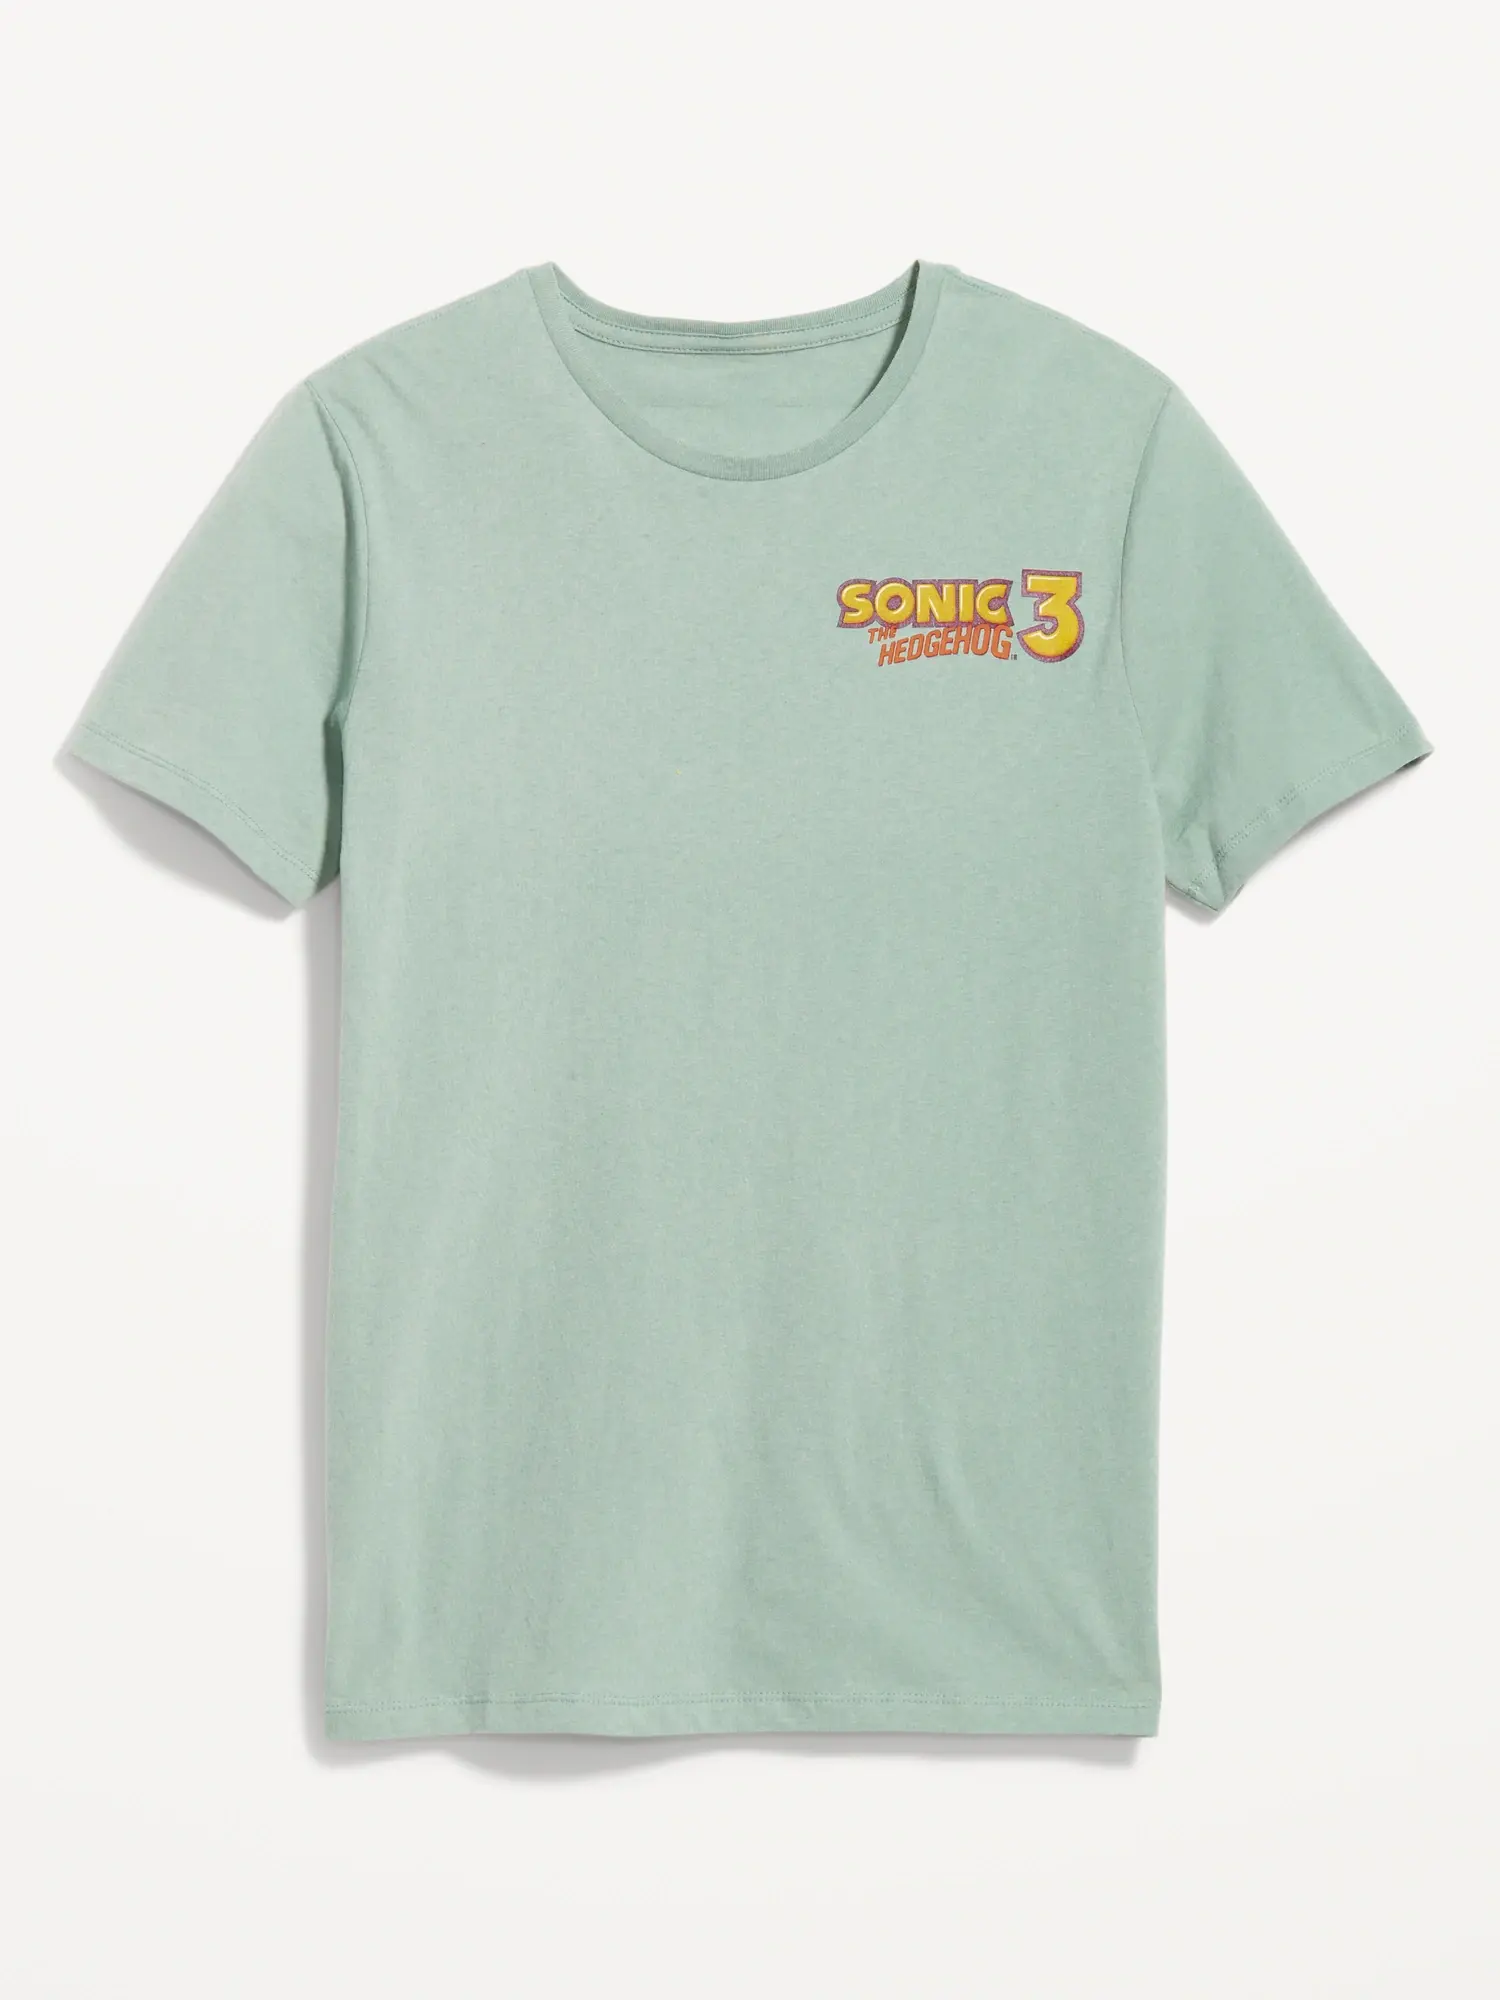 Old Navy Sonic The Hedgehog 3™ Gender-Neutral T-Shirt for Adults blue. 1